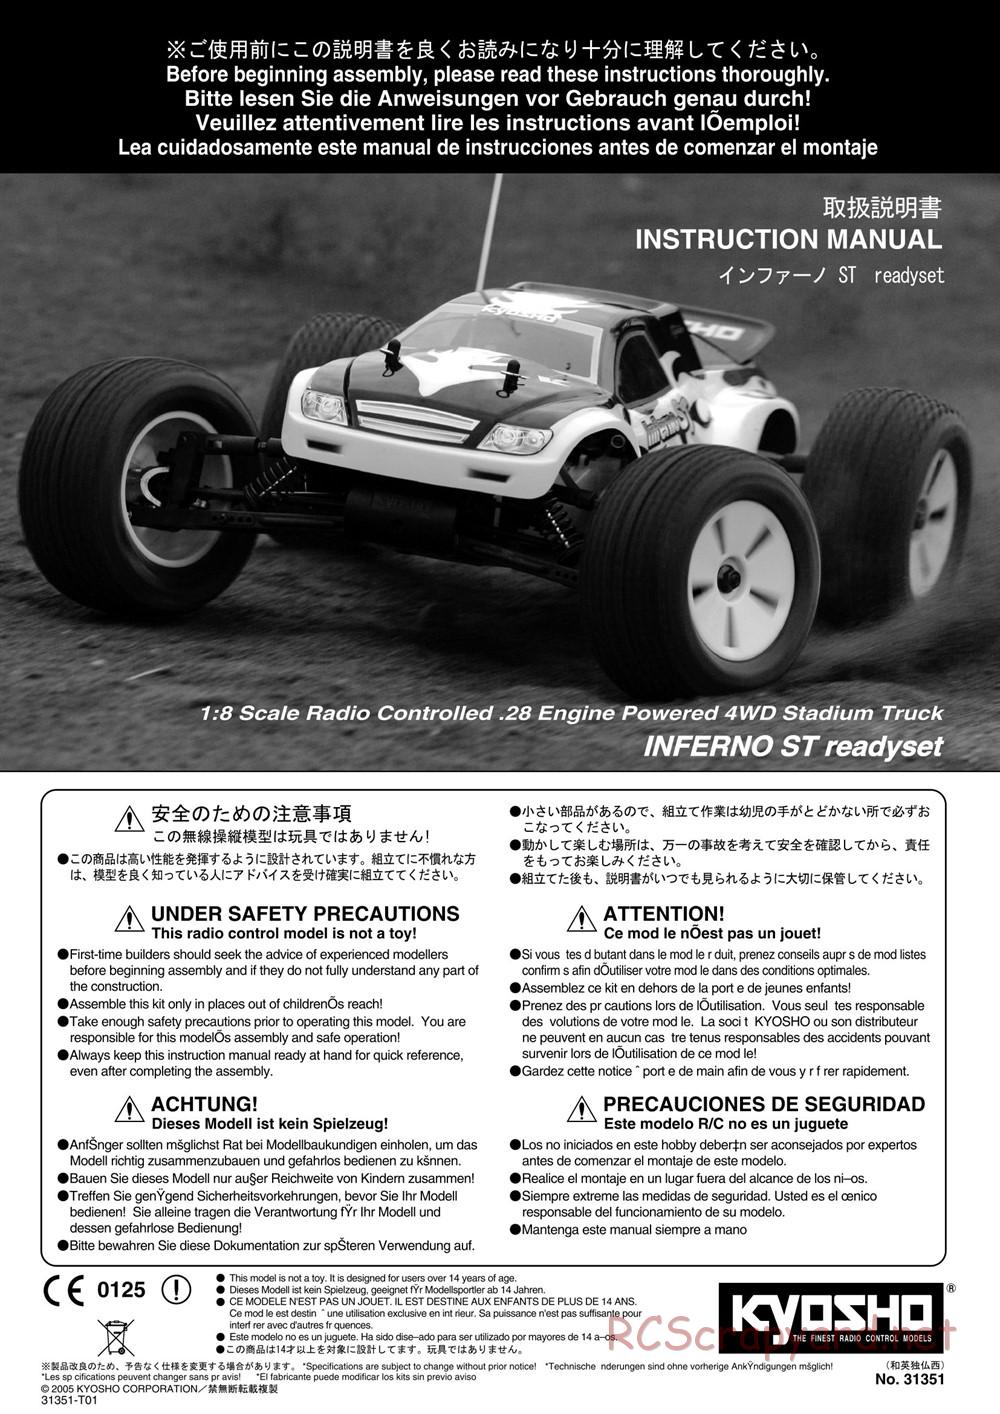 Kyosho - Inferno ST (2005) - Manual - Page 1